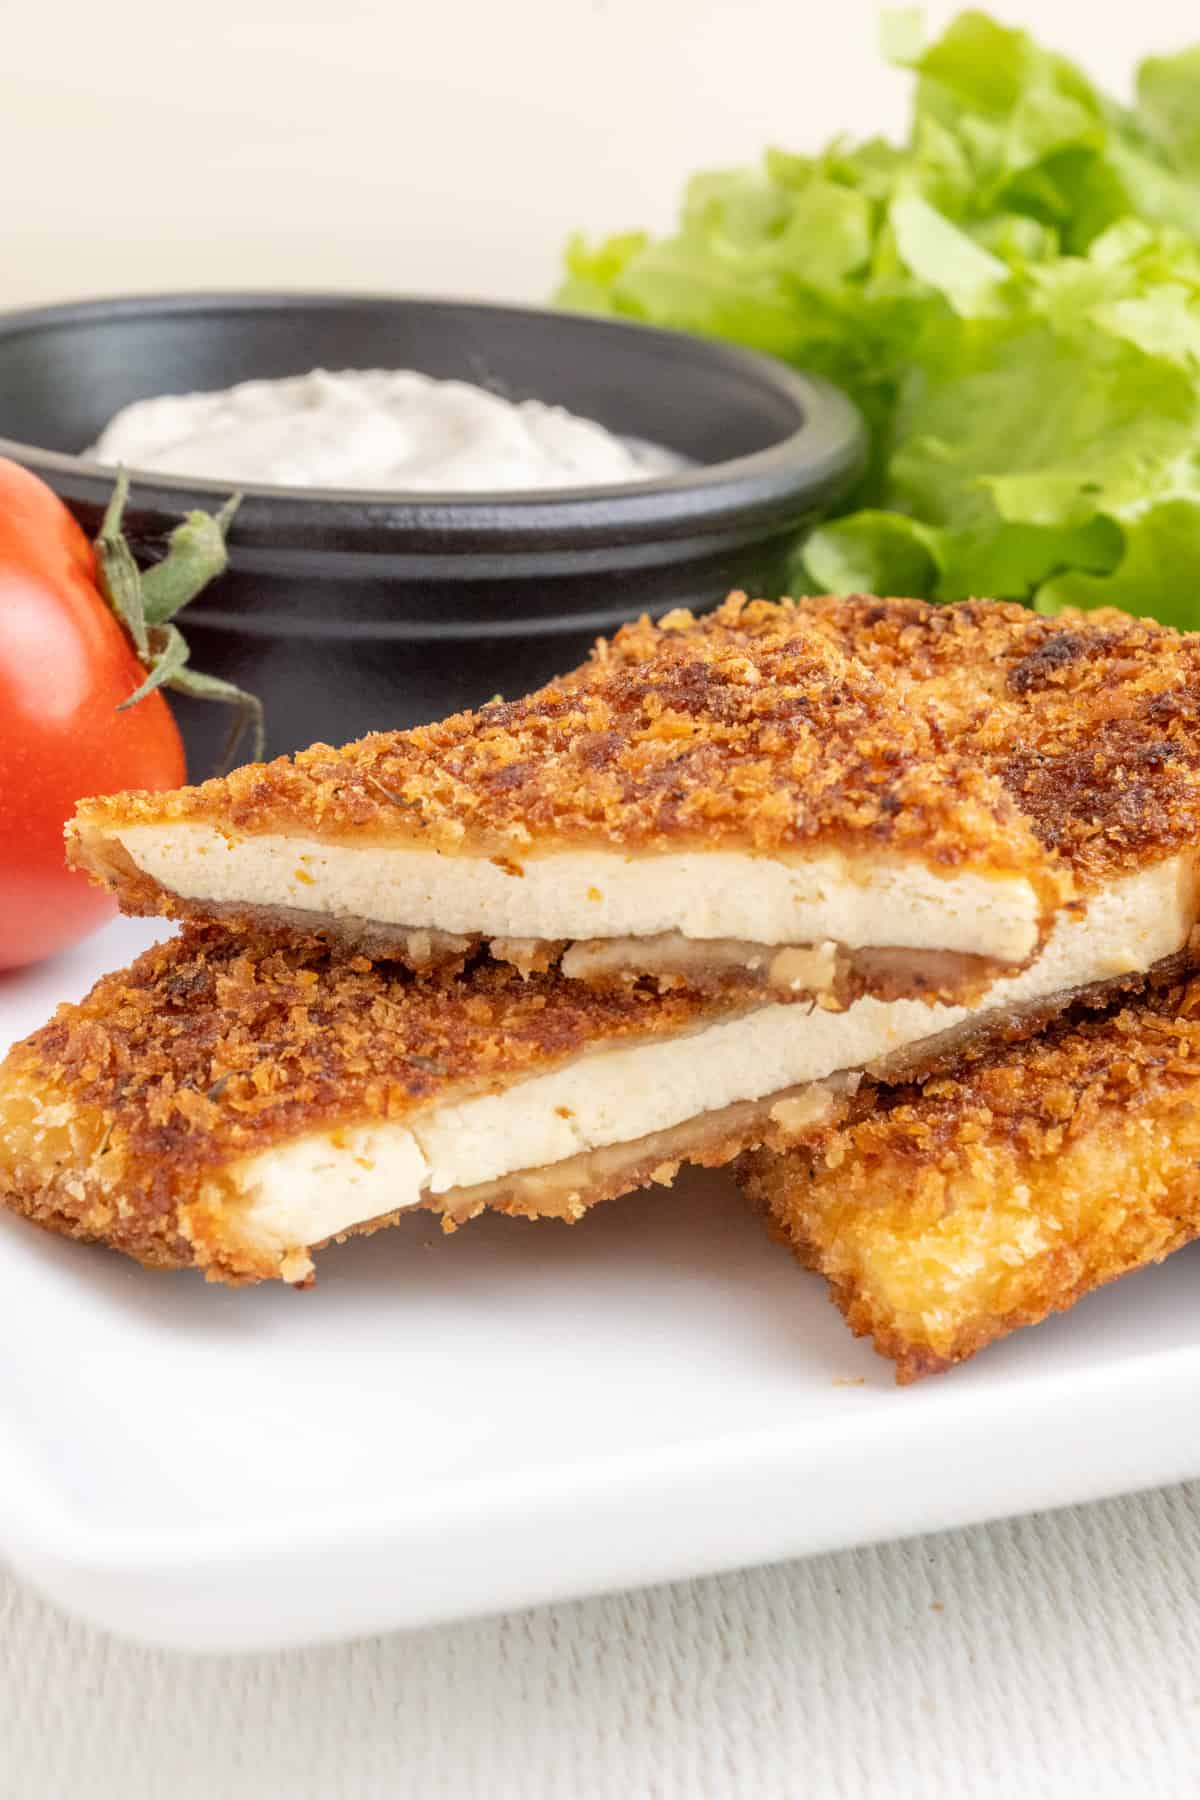 The image depicts the crispy fried crust of golden brown breadcrumbs and the tender inside texture of a slice of breaded tofu cut in two.